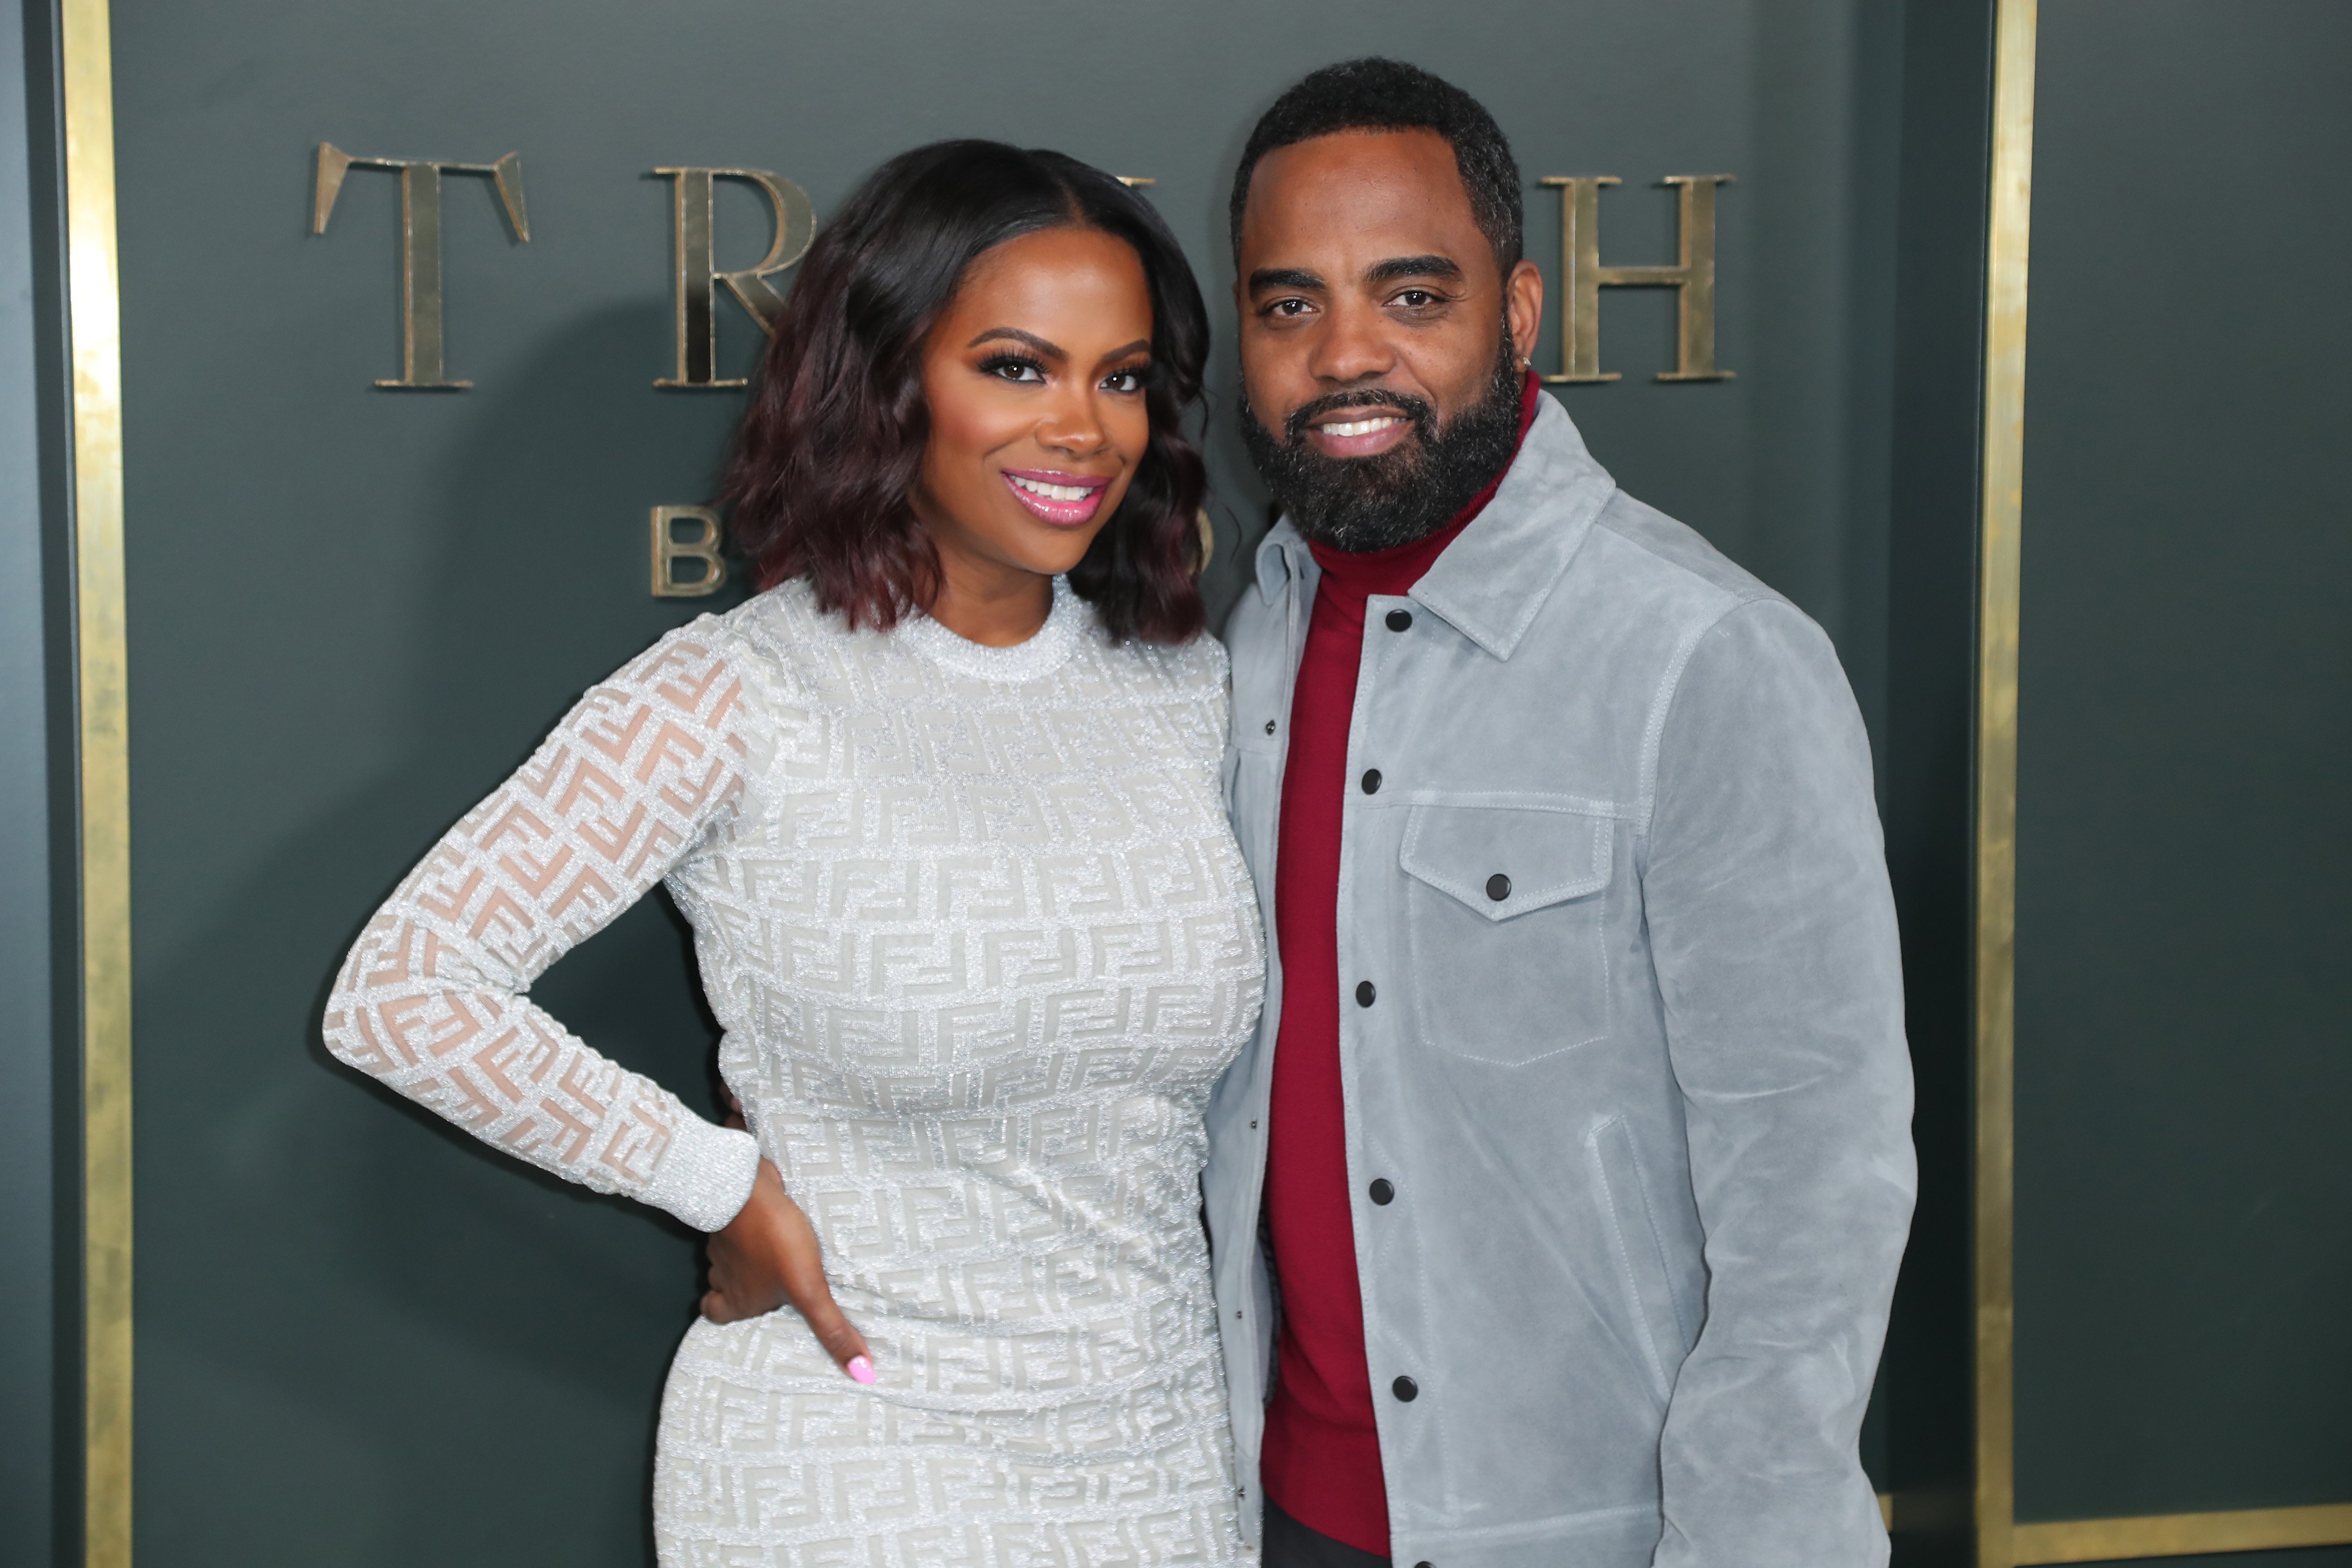 Kandi Burruss and Todd Tucker at the Beverly Hills Premiere Of Apple TV+'s "Truth Be Told" in November 2019. | Photo: GettyImages